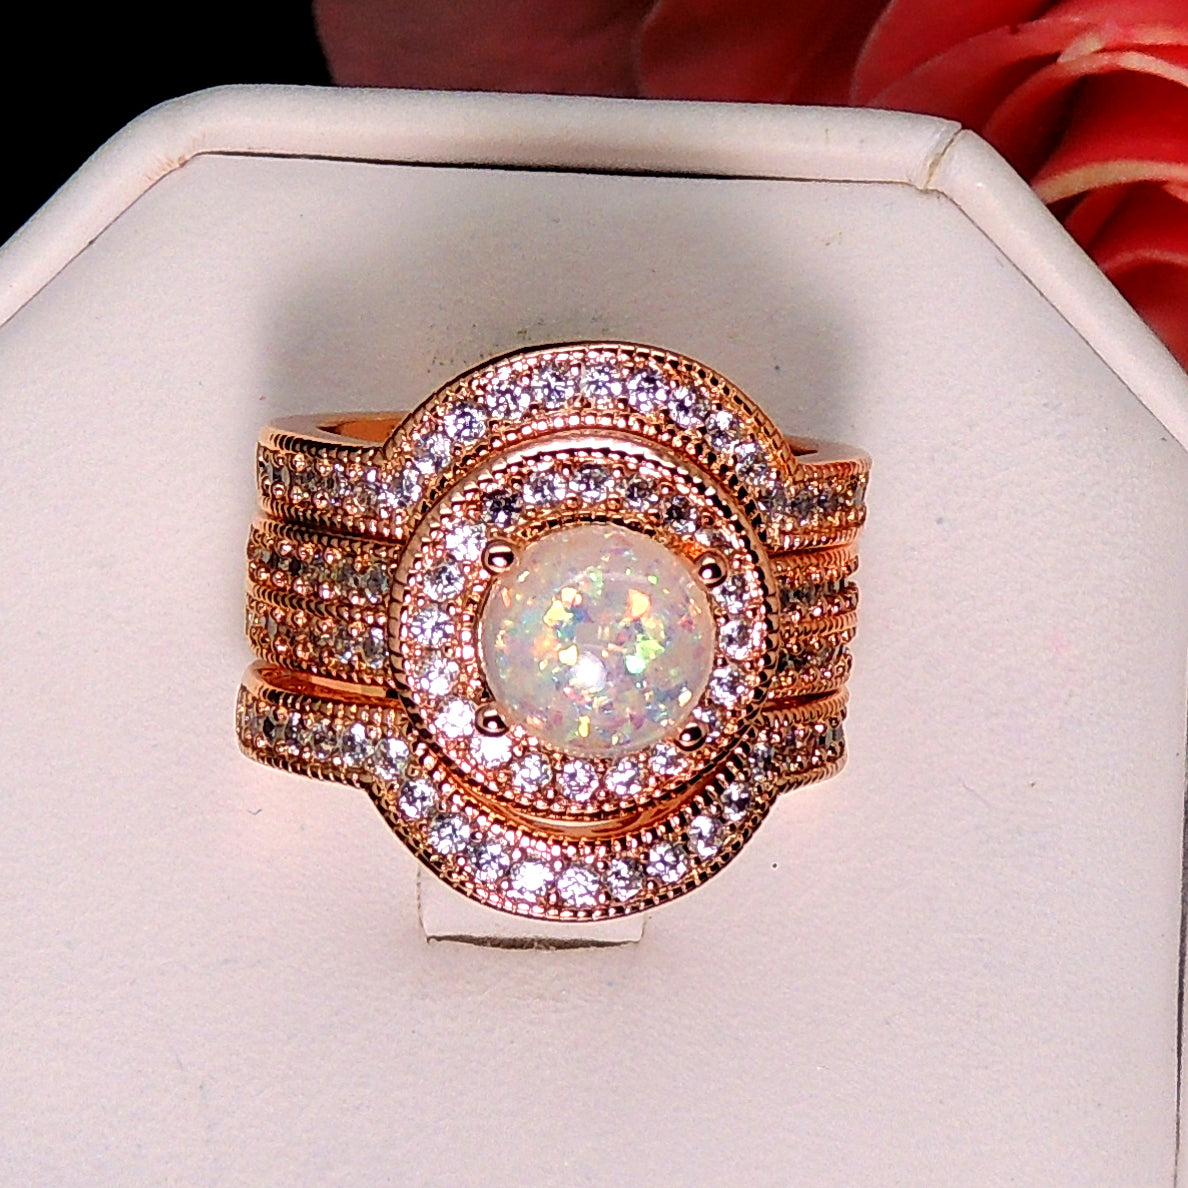 Consuelo 3 Ring Bridal Set Fire Opal Women Engagement Band Ginger Lyne Collection - 10